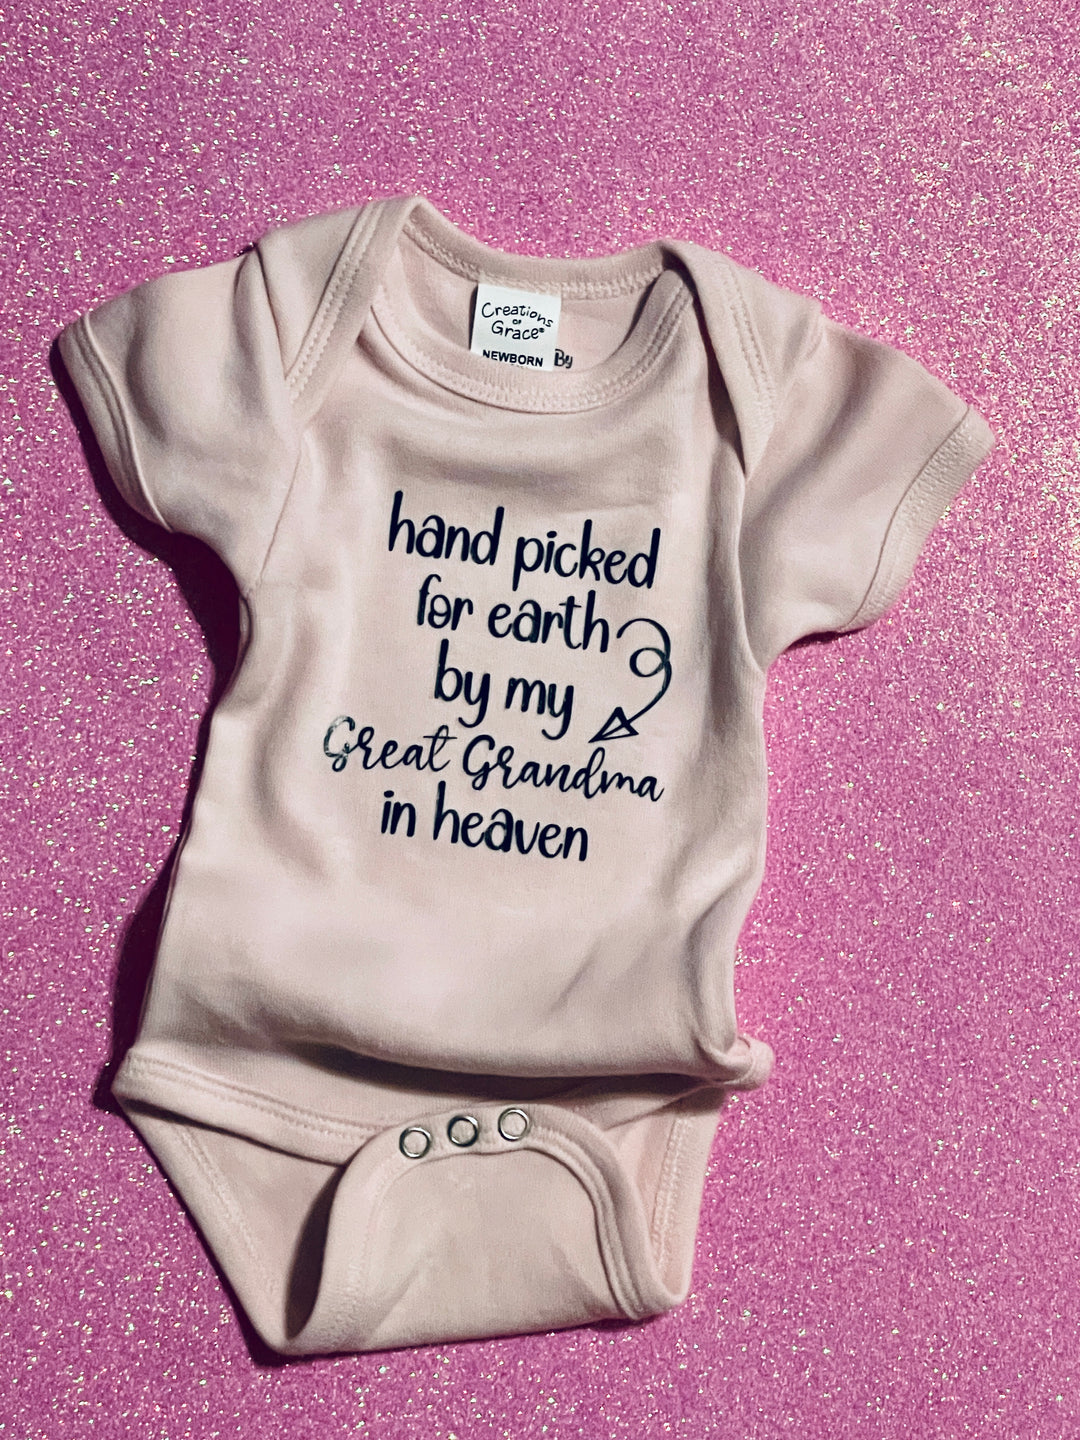 Hand Picked for Earth by ###### in Heaven - Onesie